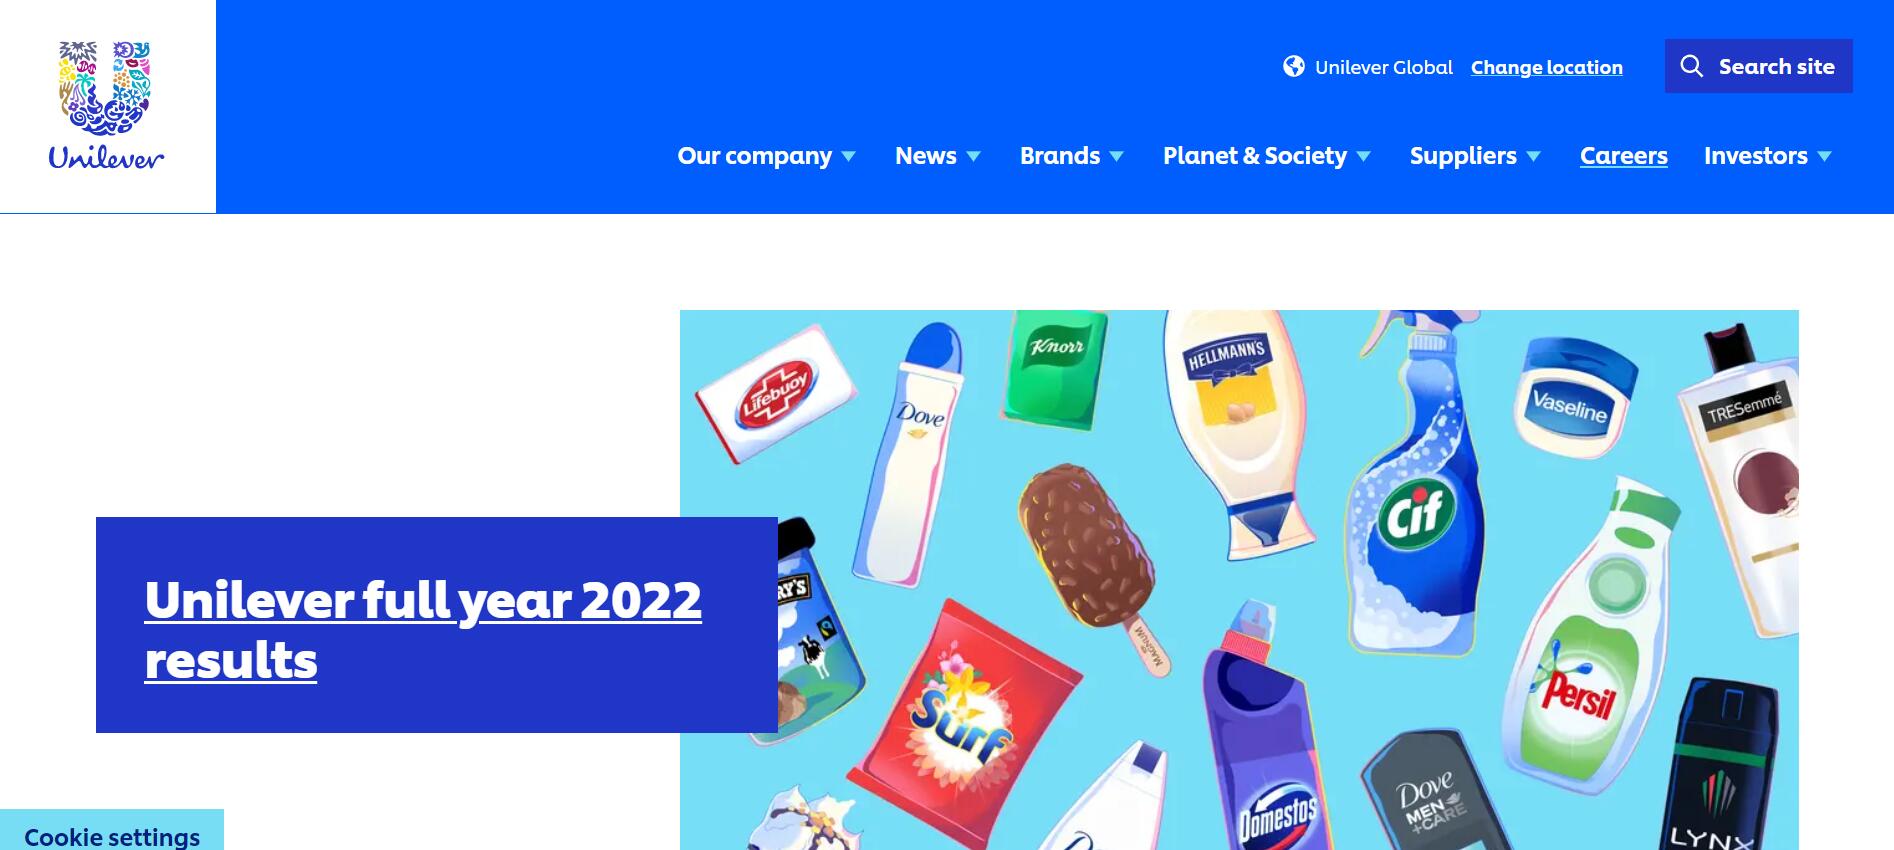 Unilever Recorded €60.1 Billion Turnover in FY 2022 with 14.5% Increase, Forecasting Continuous Cost Inflation